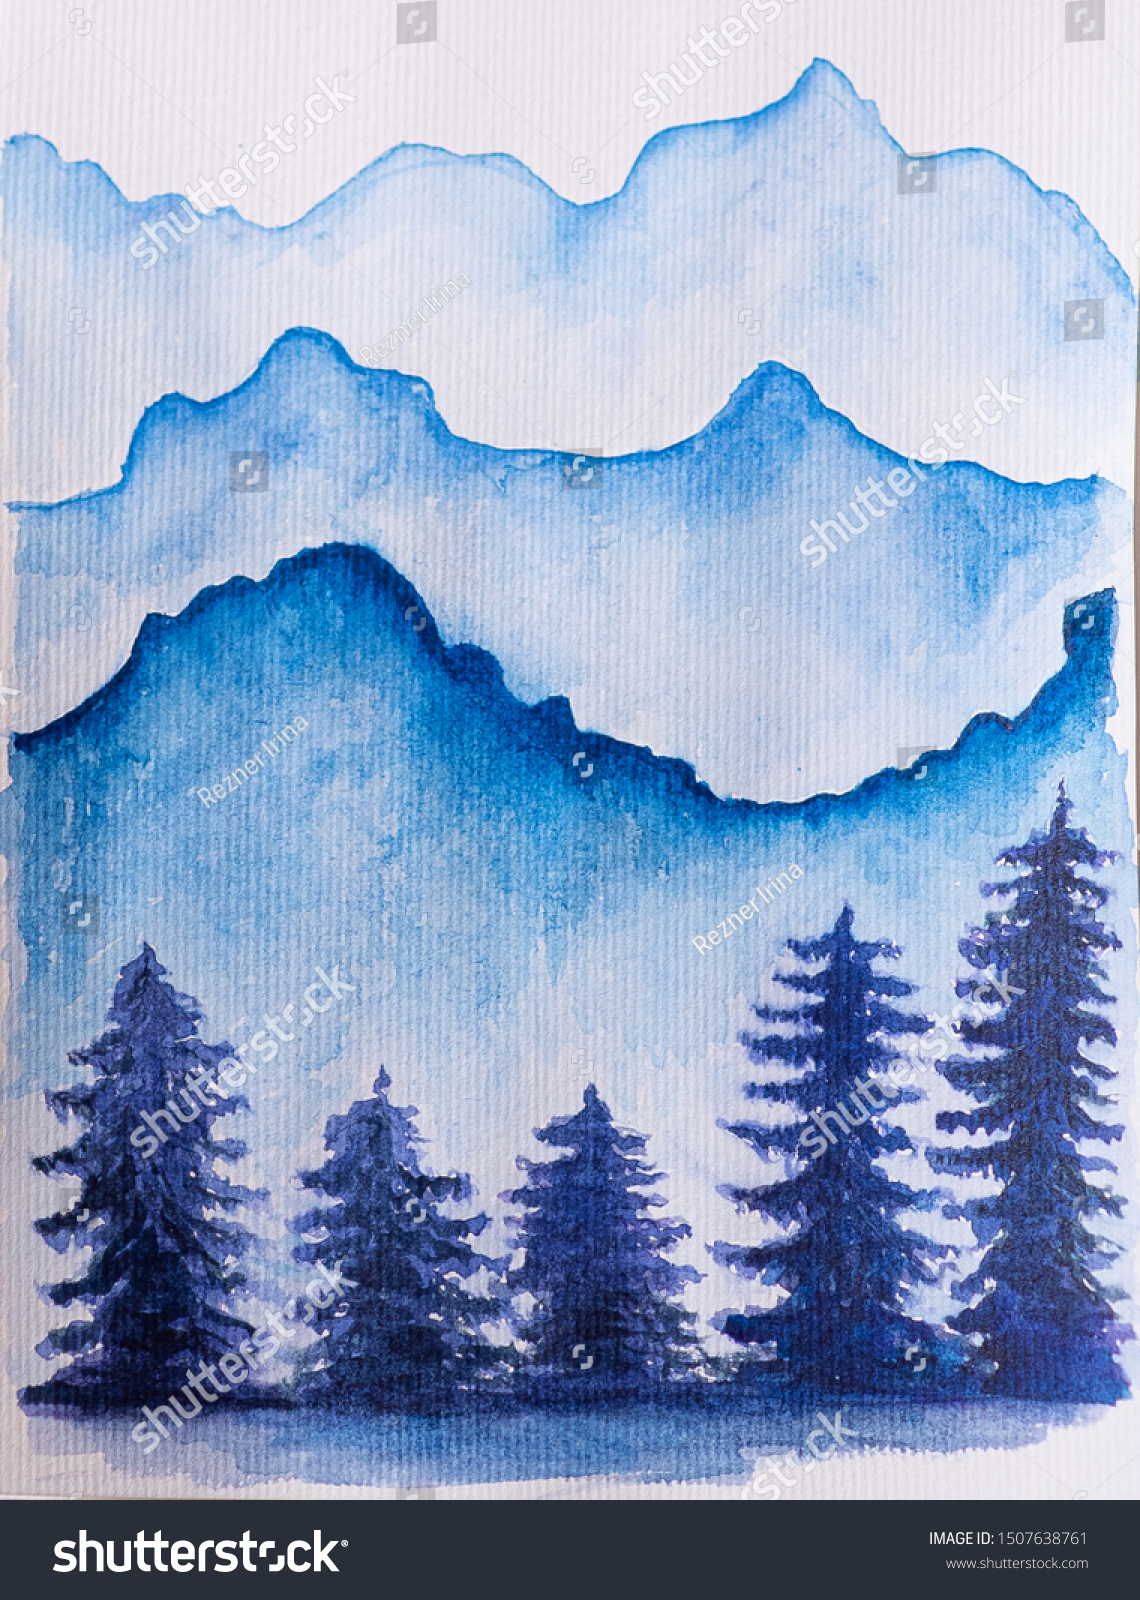 Drawing Watercolor Landscape Mountains Trees Blue Stock Photo Edit Now 1507638761 It can be applied to your drawing or painting surface using a brush or a pen. https www shutterstock com image photo drawing watercolor landscape mountains trees blue 1507638761